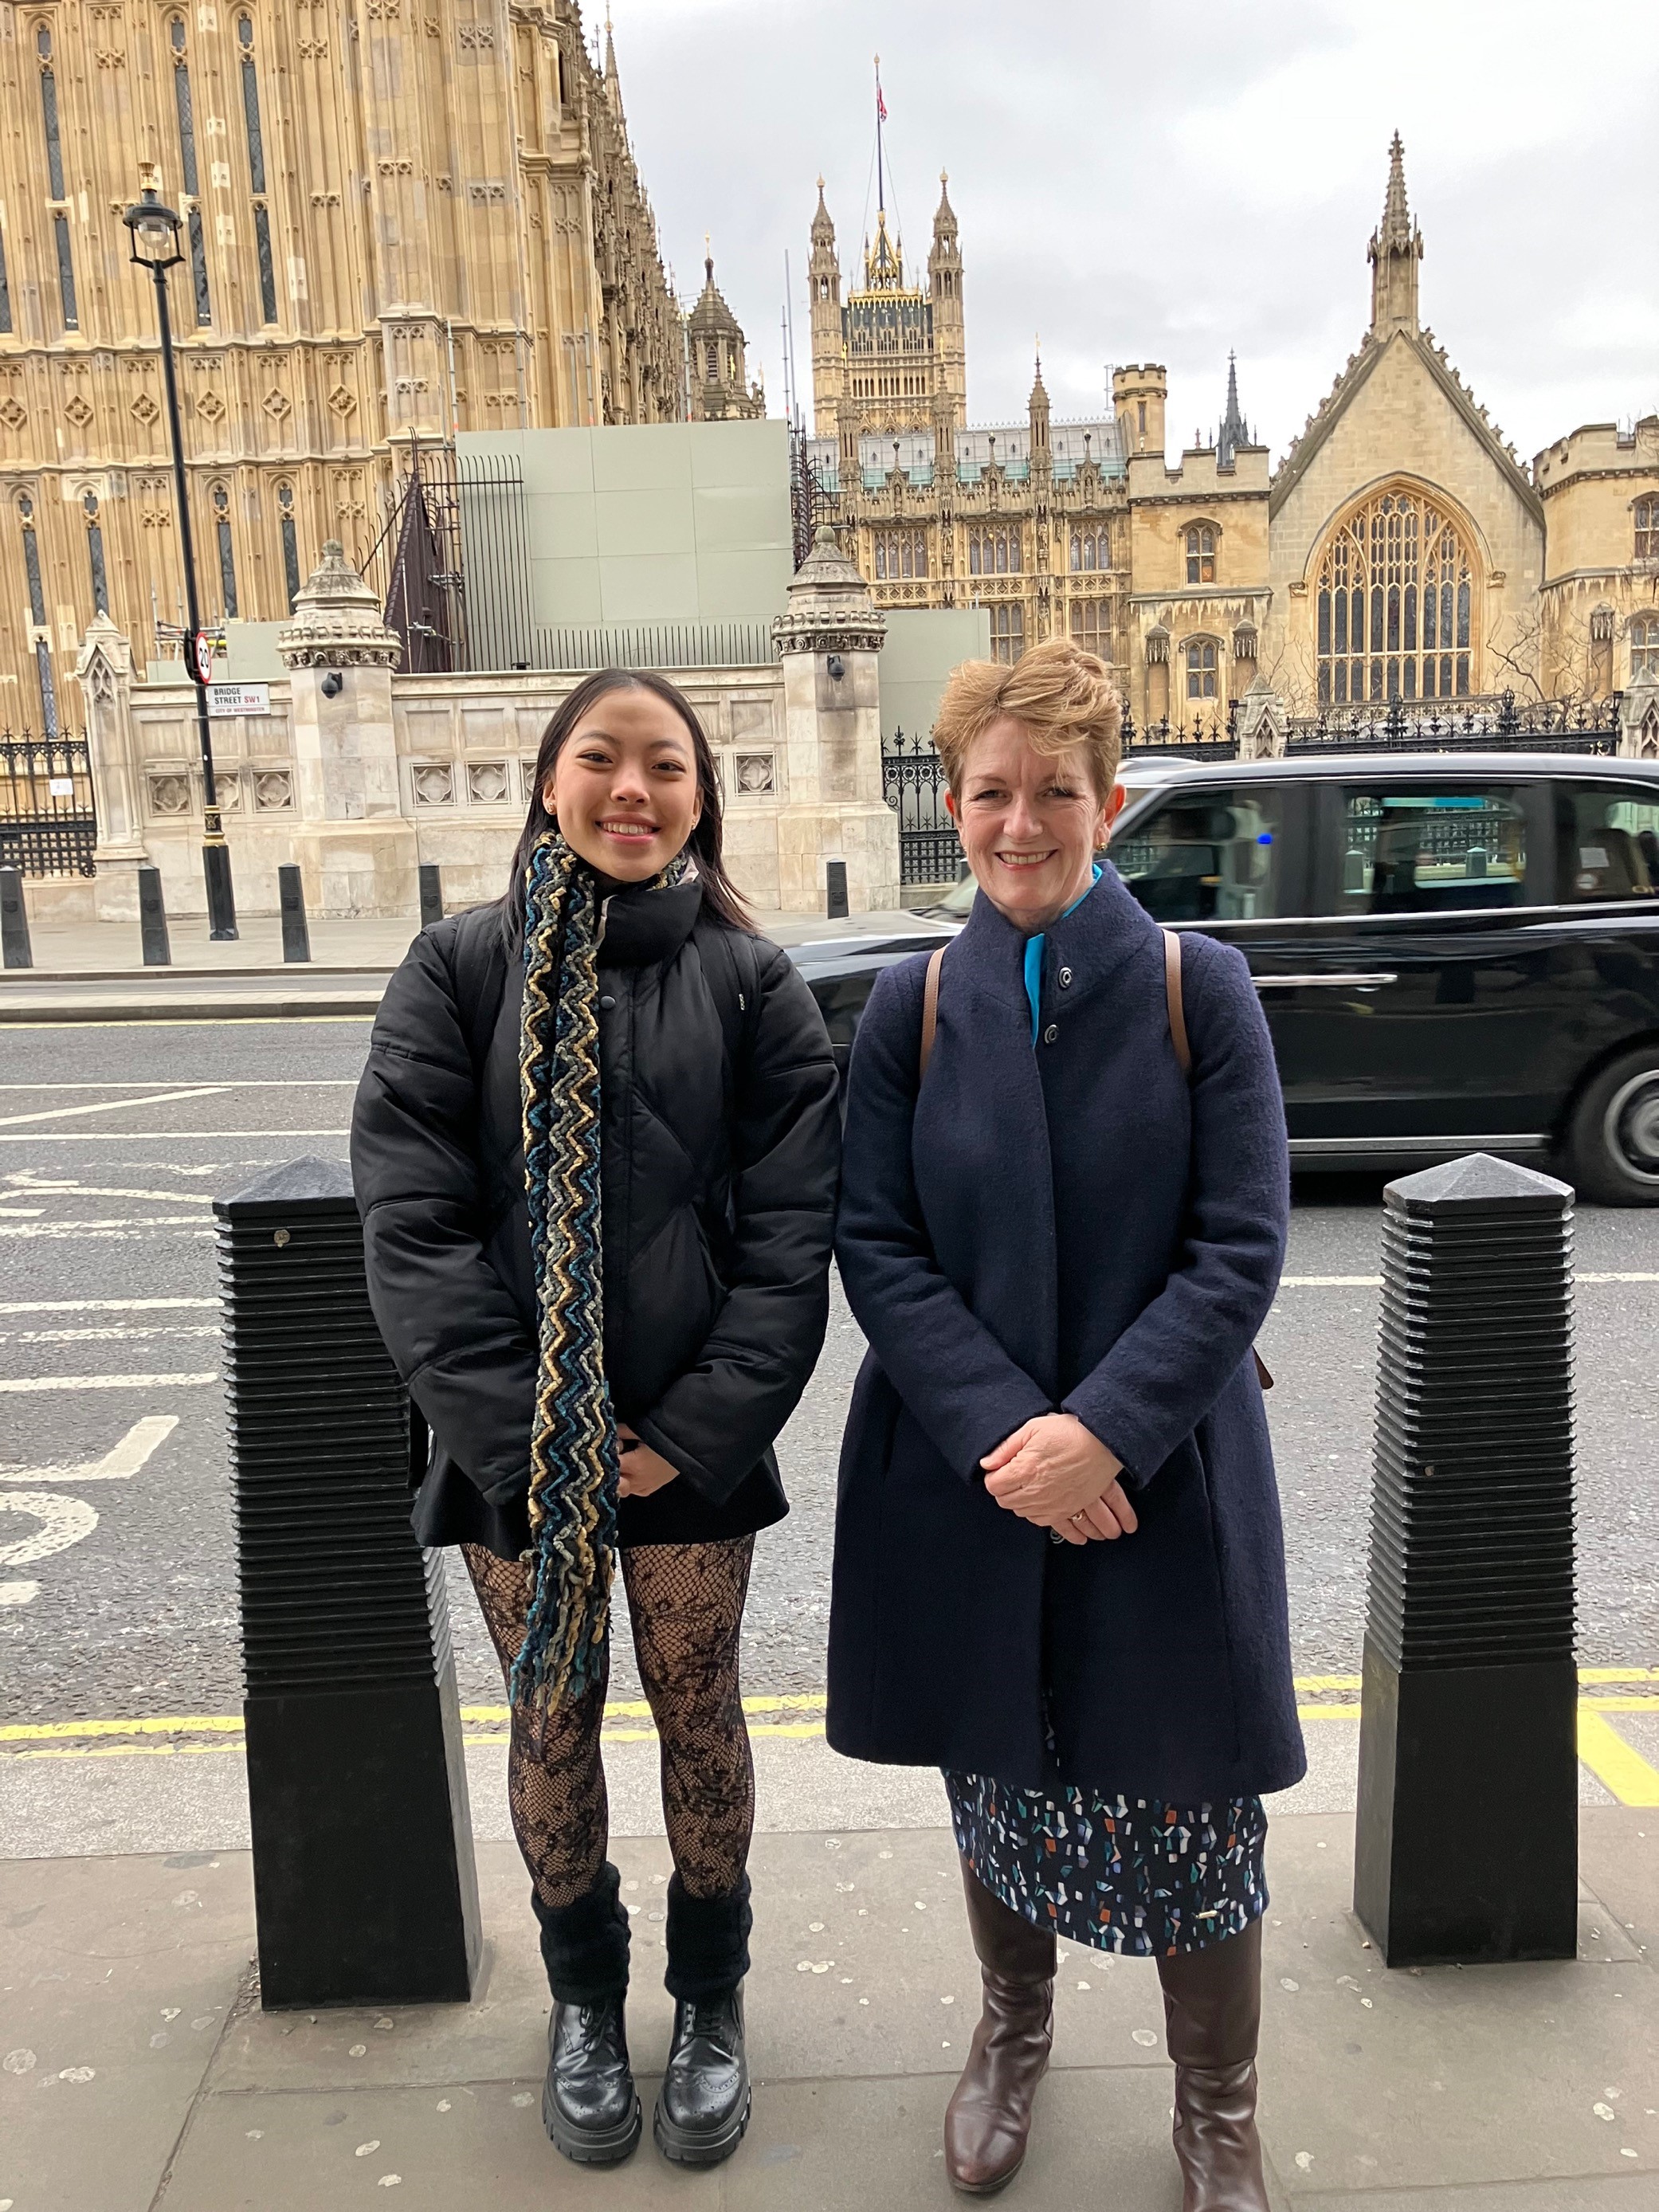 Alison Chang and Elizabeth Kitcatt, co-chairs of AQA's Student Advisory Group